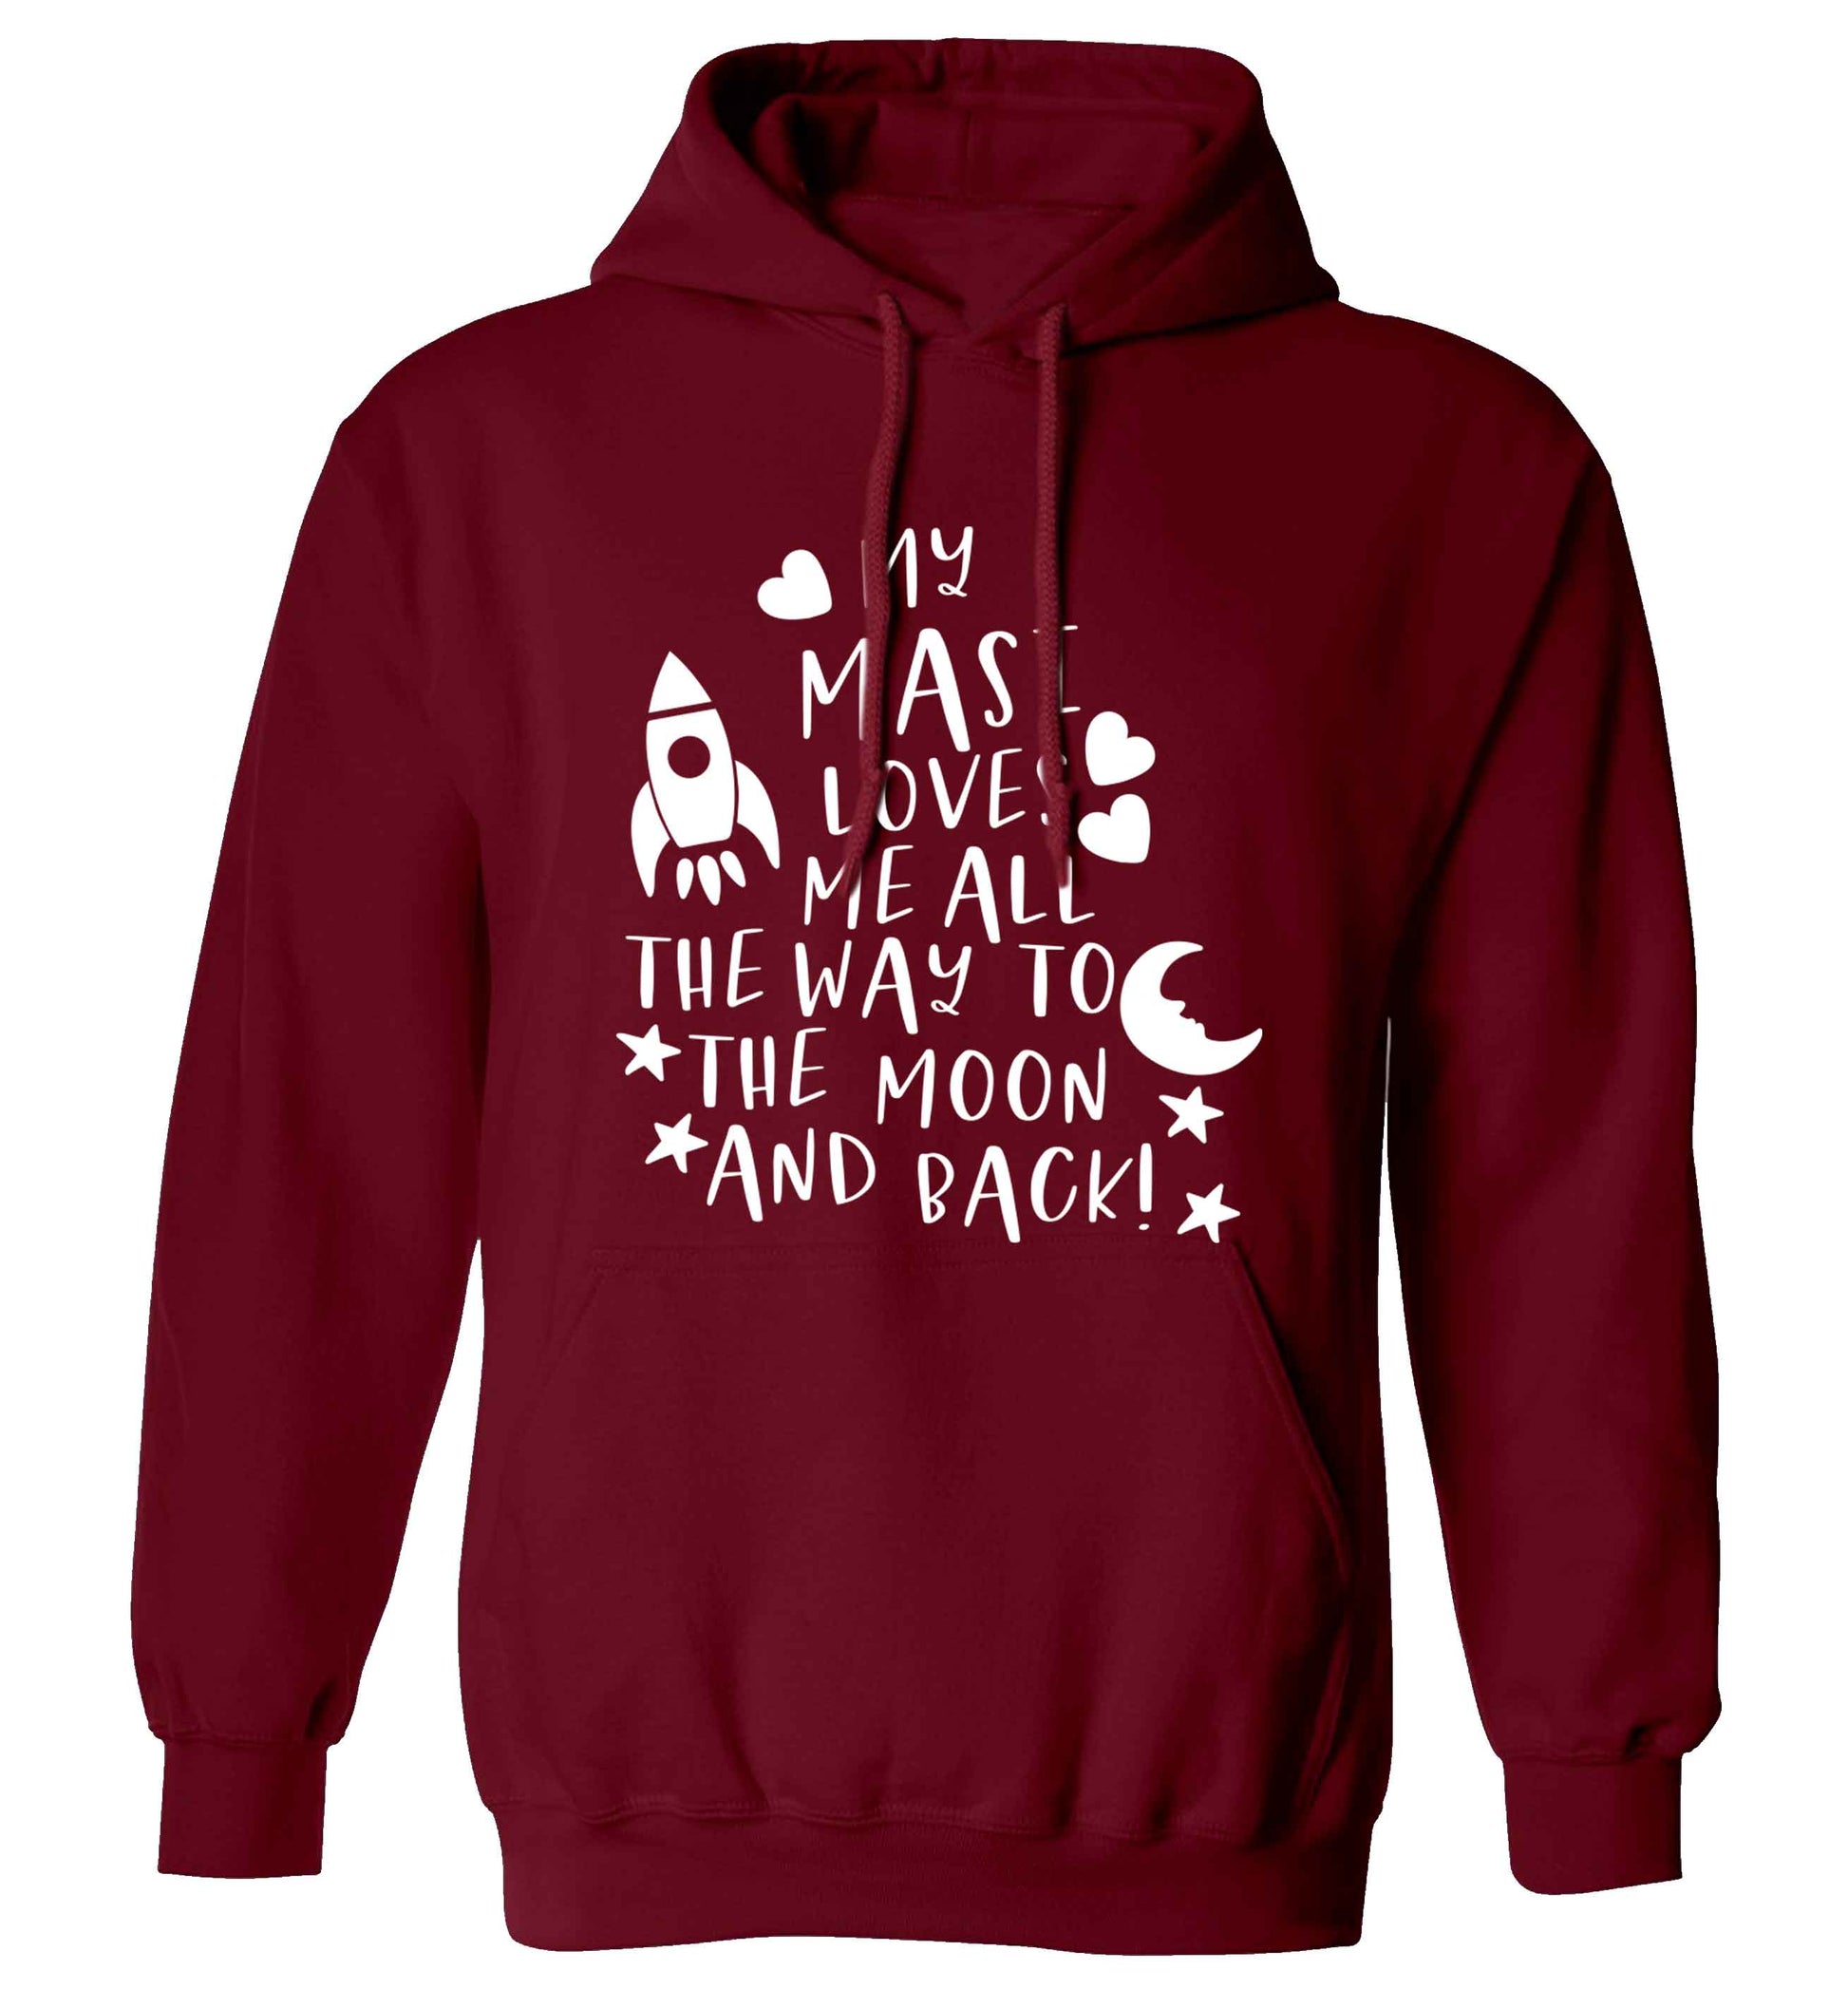 My masi loves me all the way to the moon and back adults unisex maroon hoodie 2XL